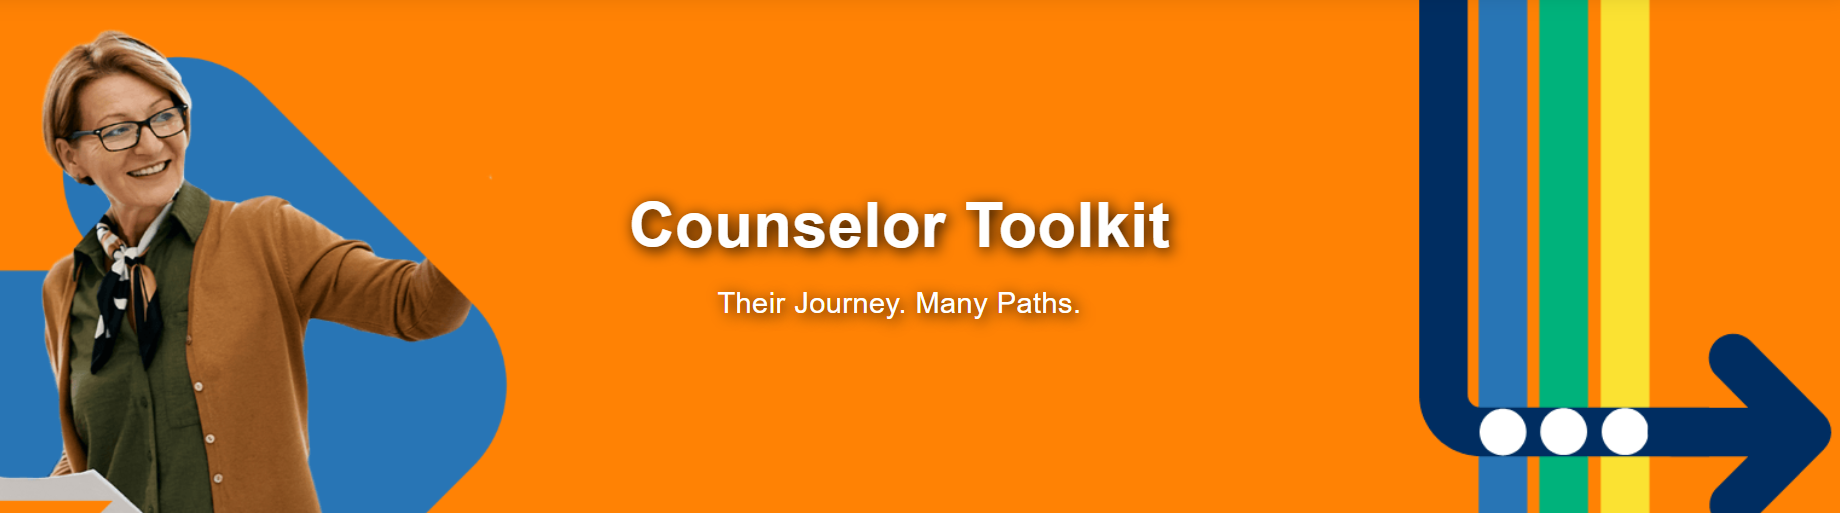 counselor-toolkit